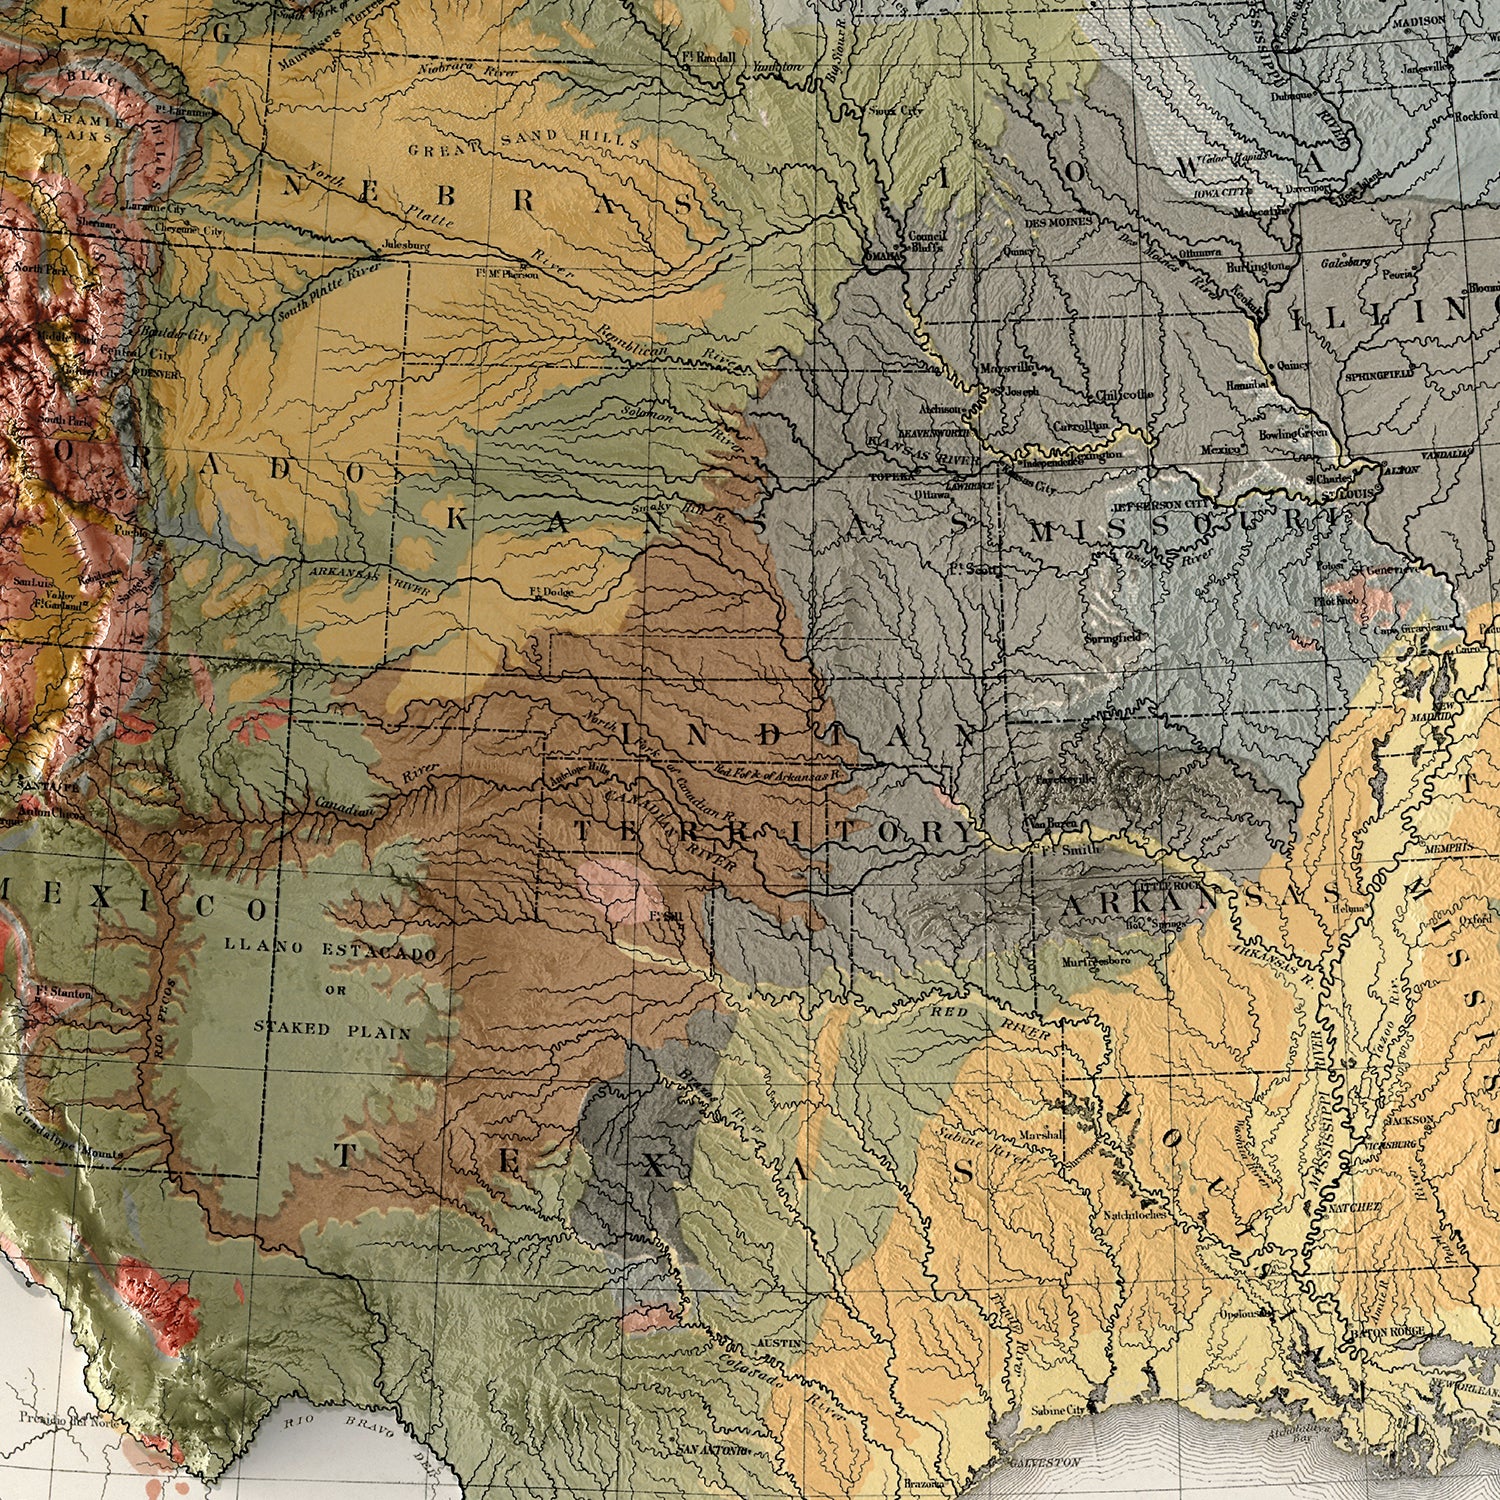 United States - Vintage Shaded Relief Map (1874)